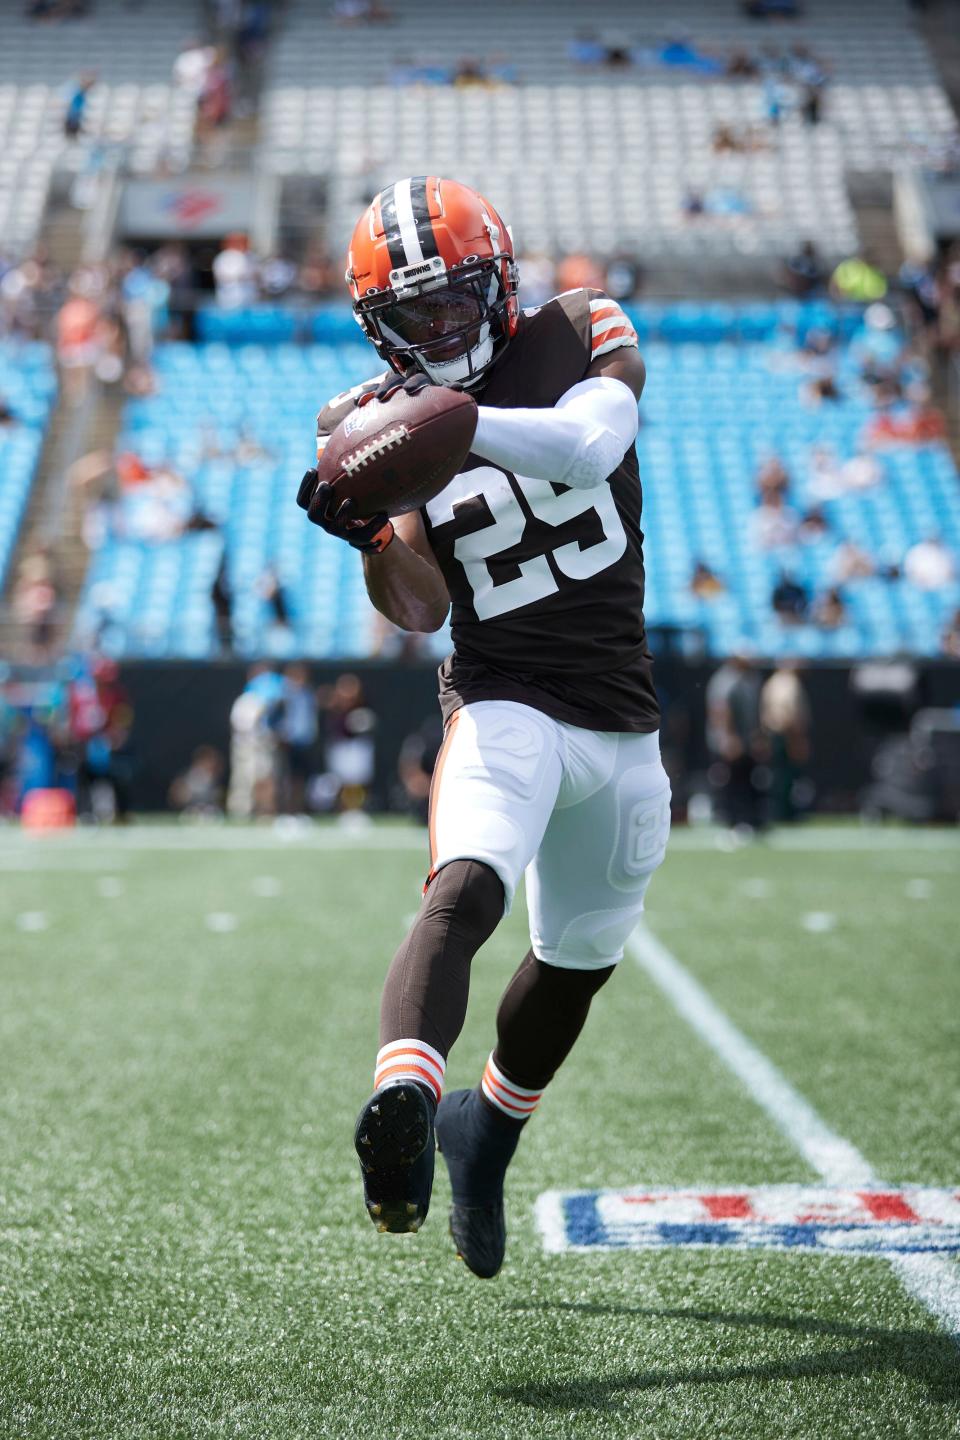 Browns running back Demetric Felton Jr. catches a pass before playing the Panthers, Sunday, Sep. 11, 2022, in Charlotte, N.C.